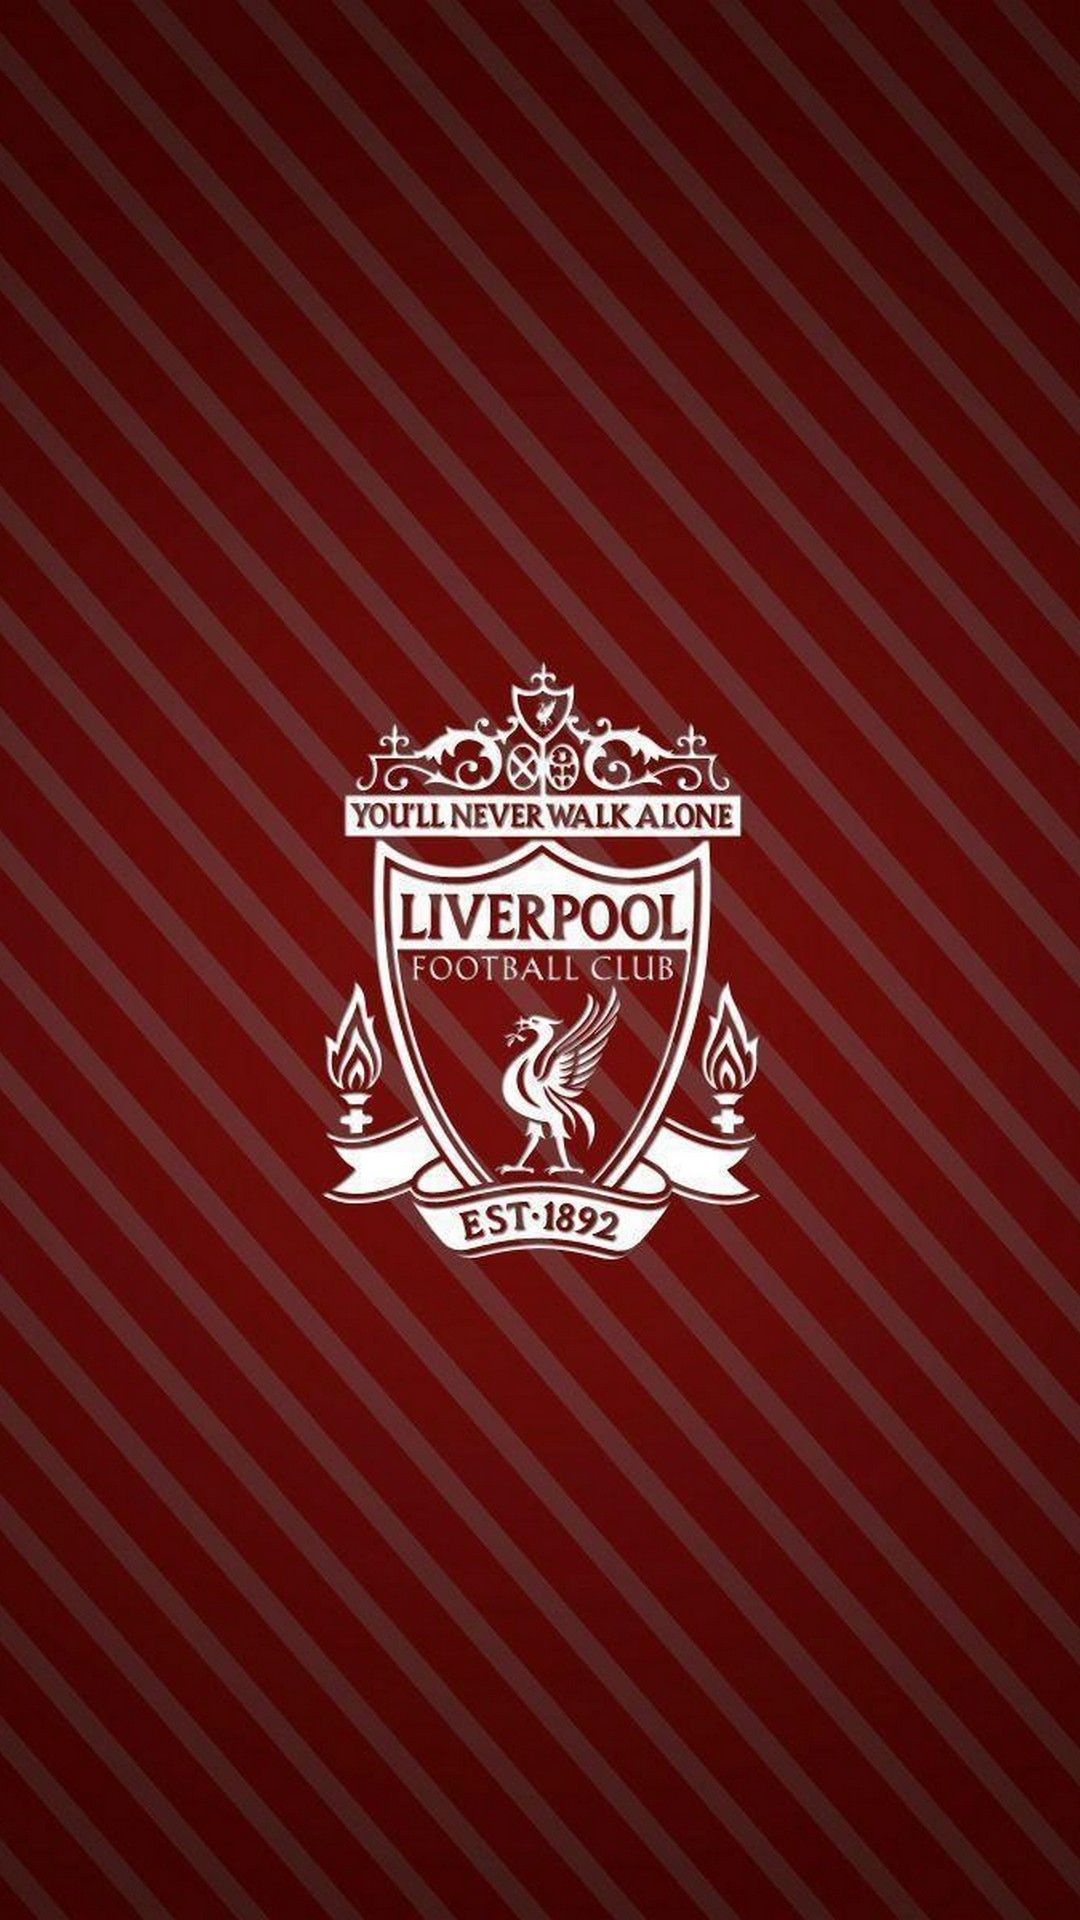 Liverpool Football Club: One of the most recognized and storied English Premier League teams. 1080x1920 Full HD Background.